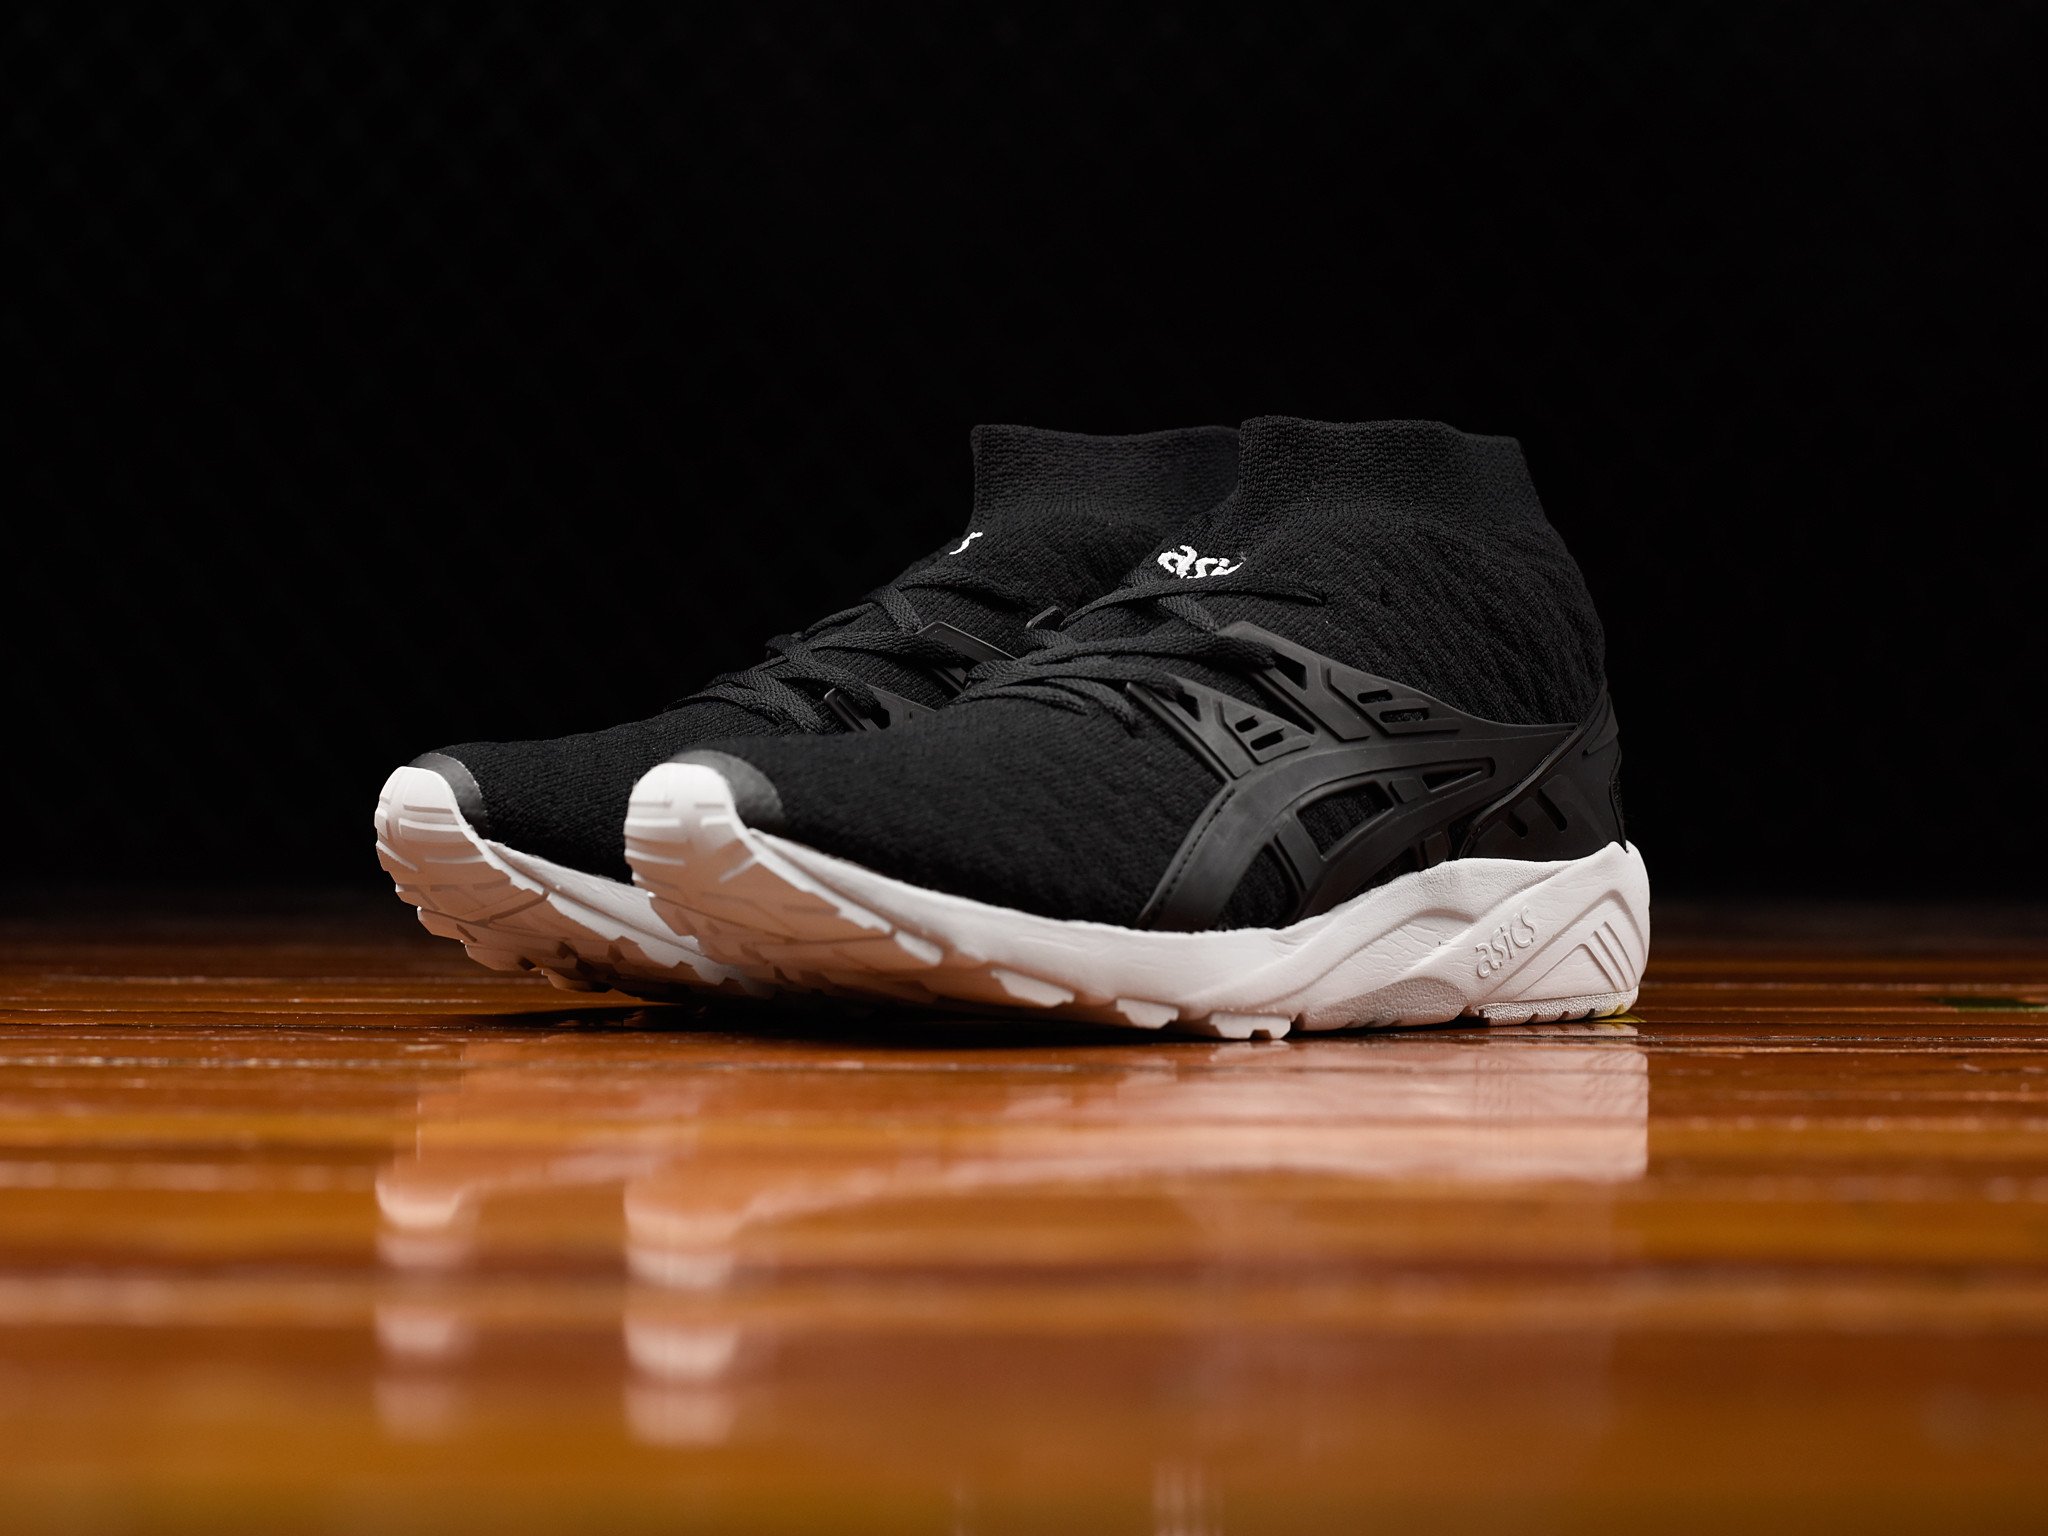 Asics Gel-Kayano Trainer Knit MT for 45 